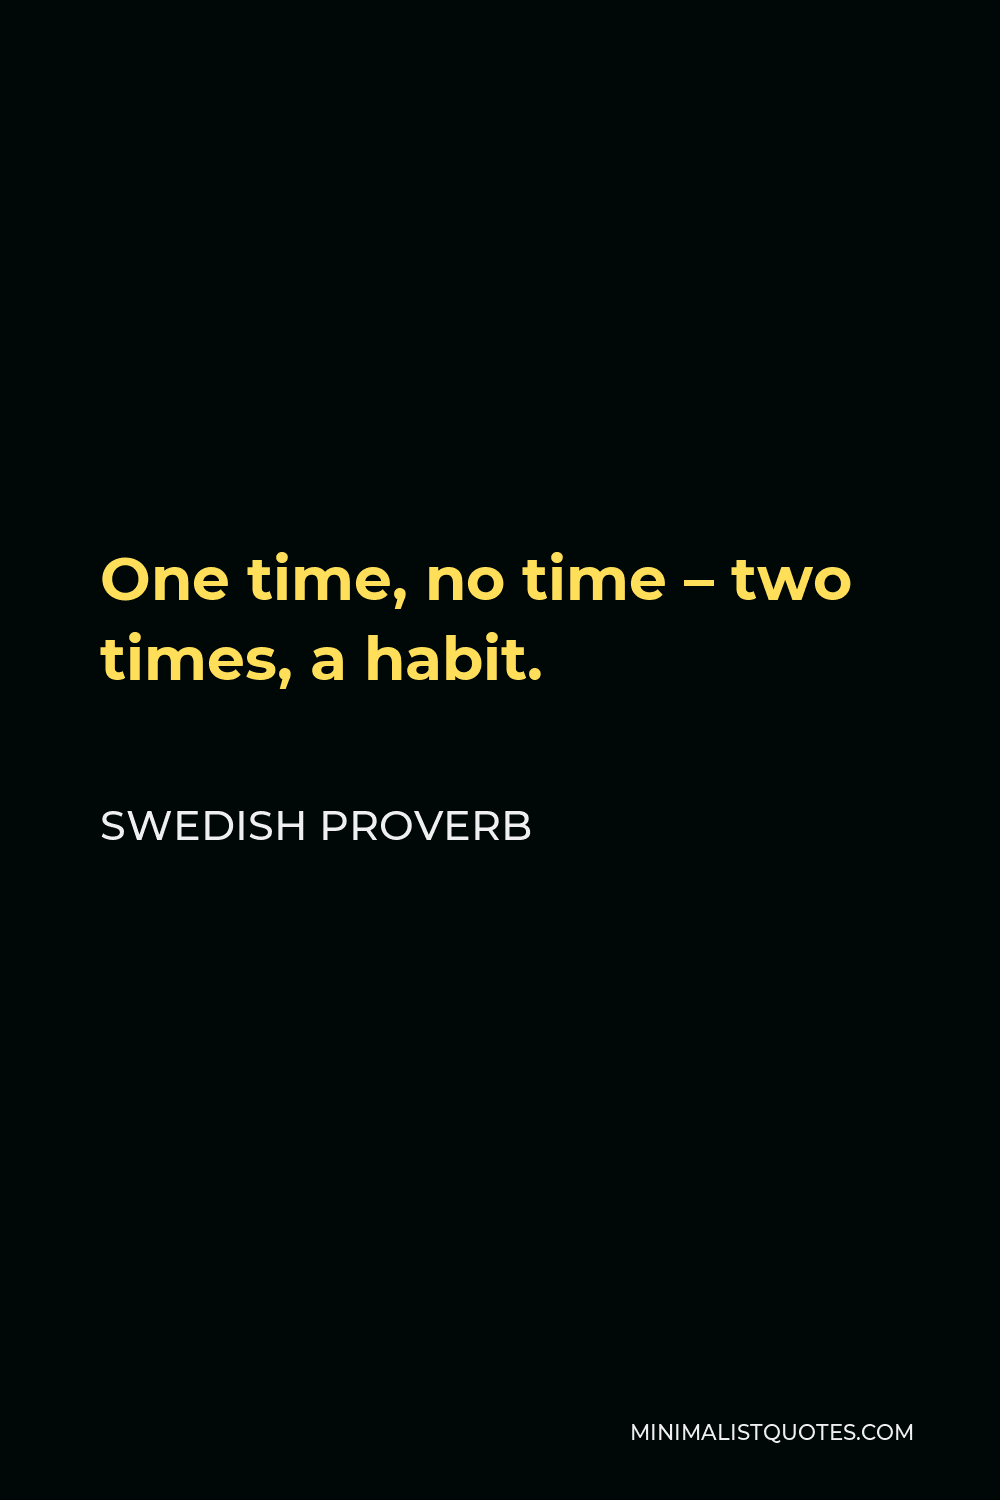 Swedish Proverb Quote - One time, no time – two times, a habit.